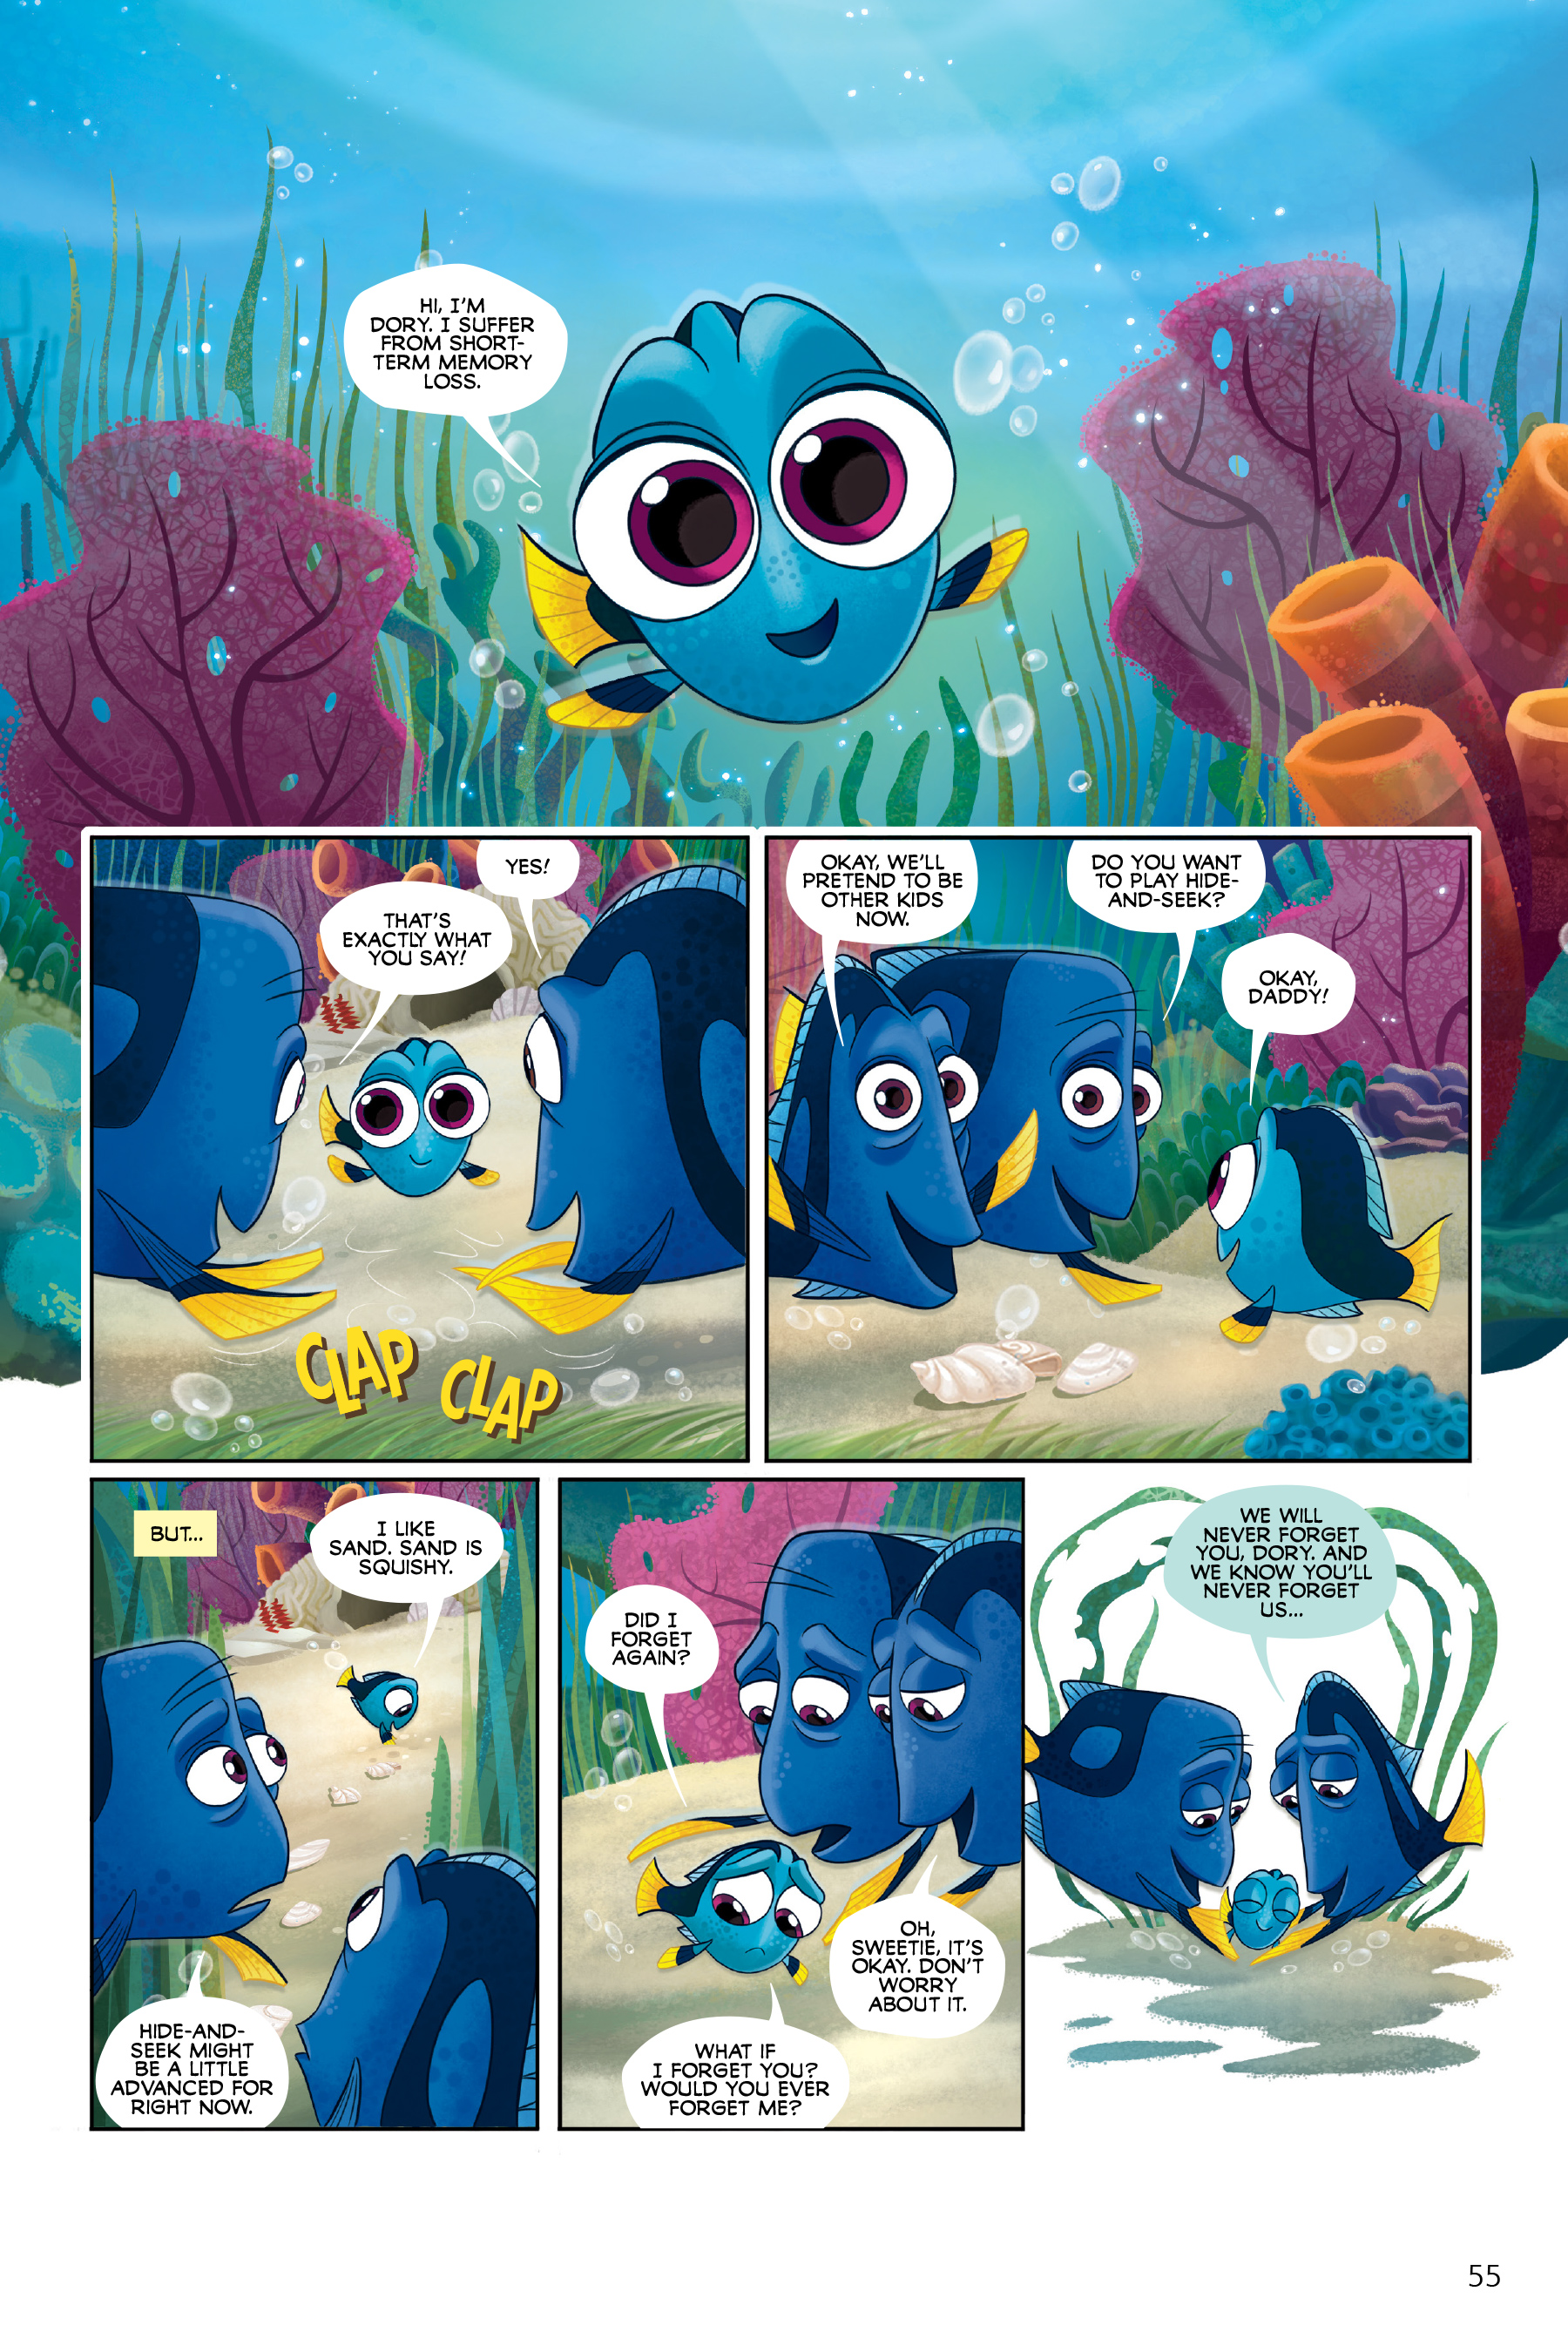 Disney Pixar Finding Nemo And Finding Dory The Story Of The Movies In Comics Tpb Read Disney